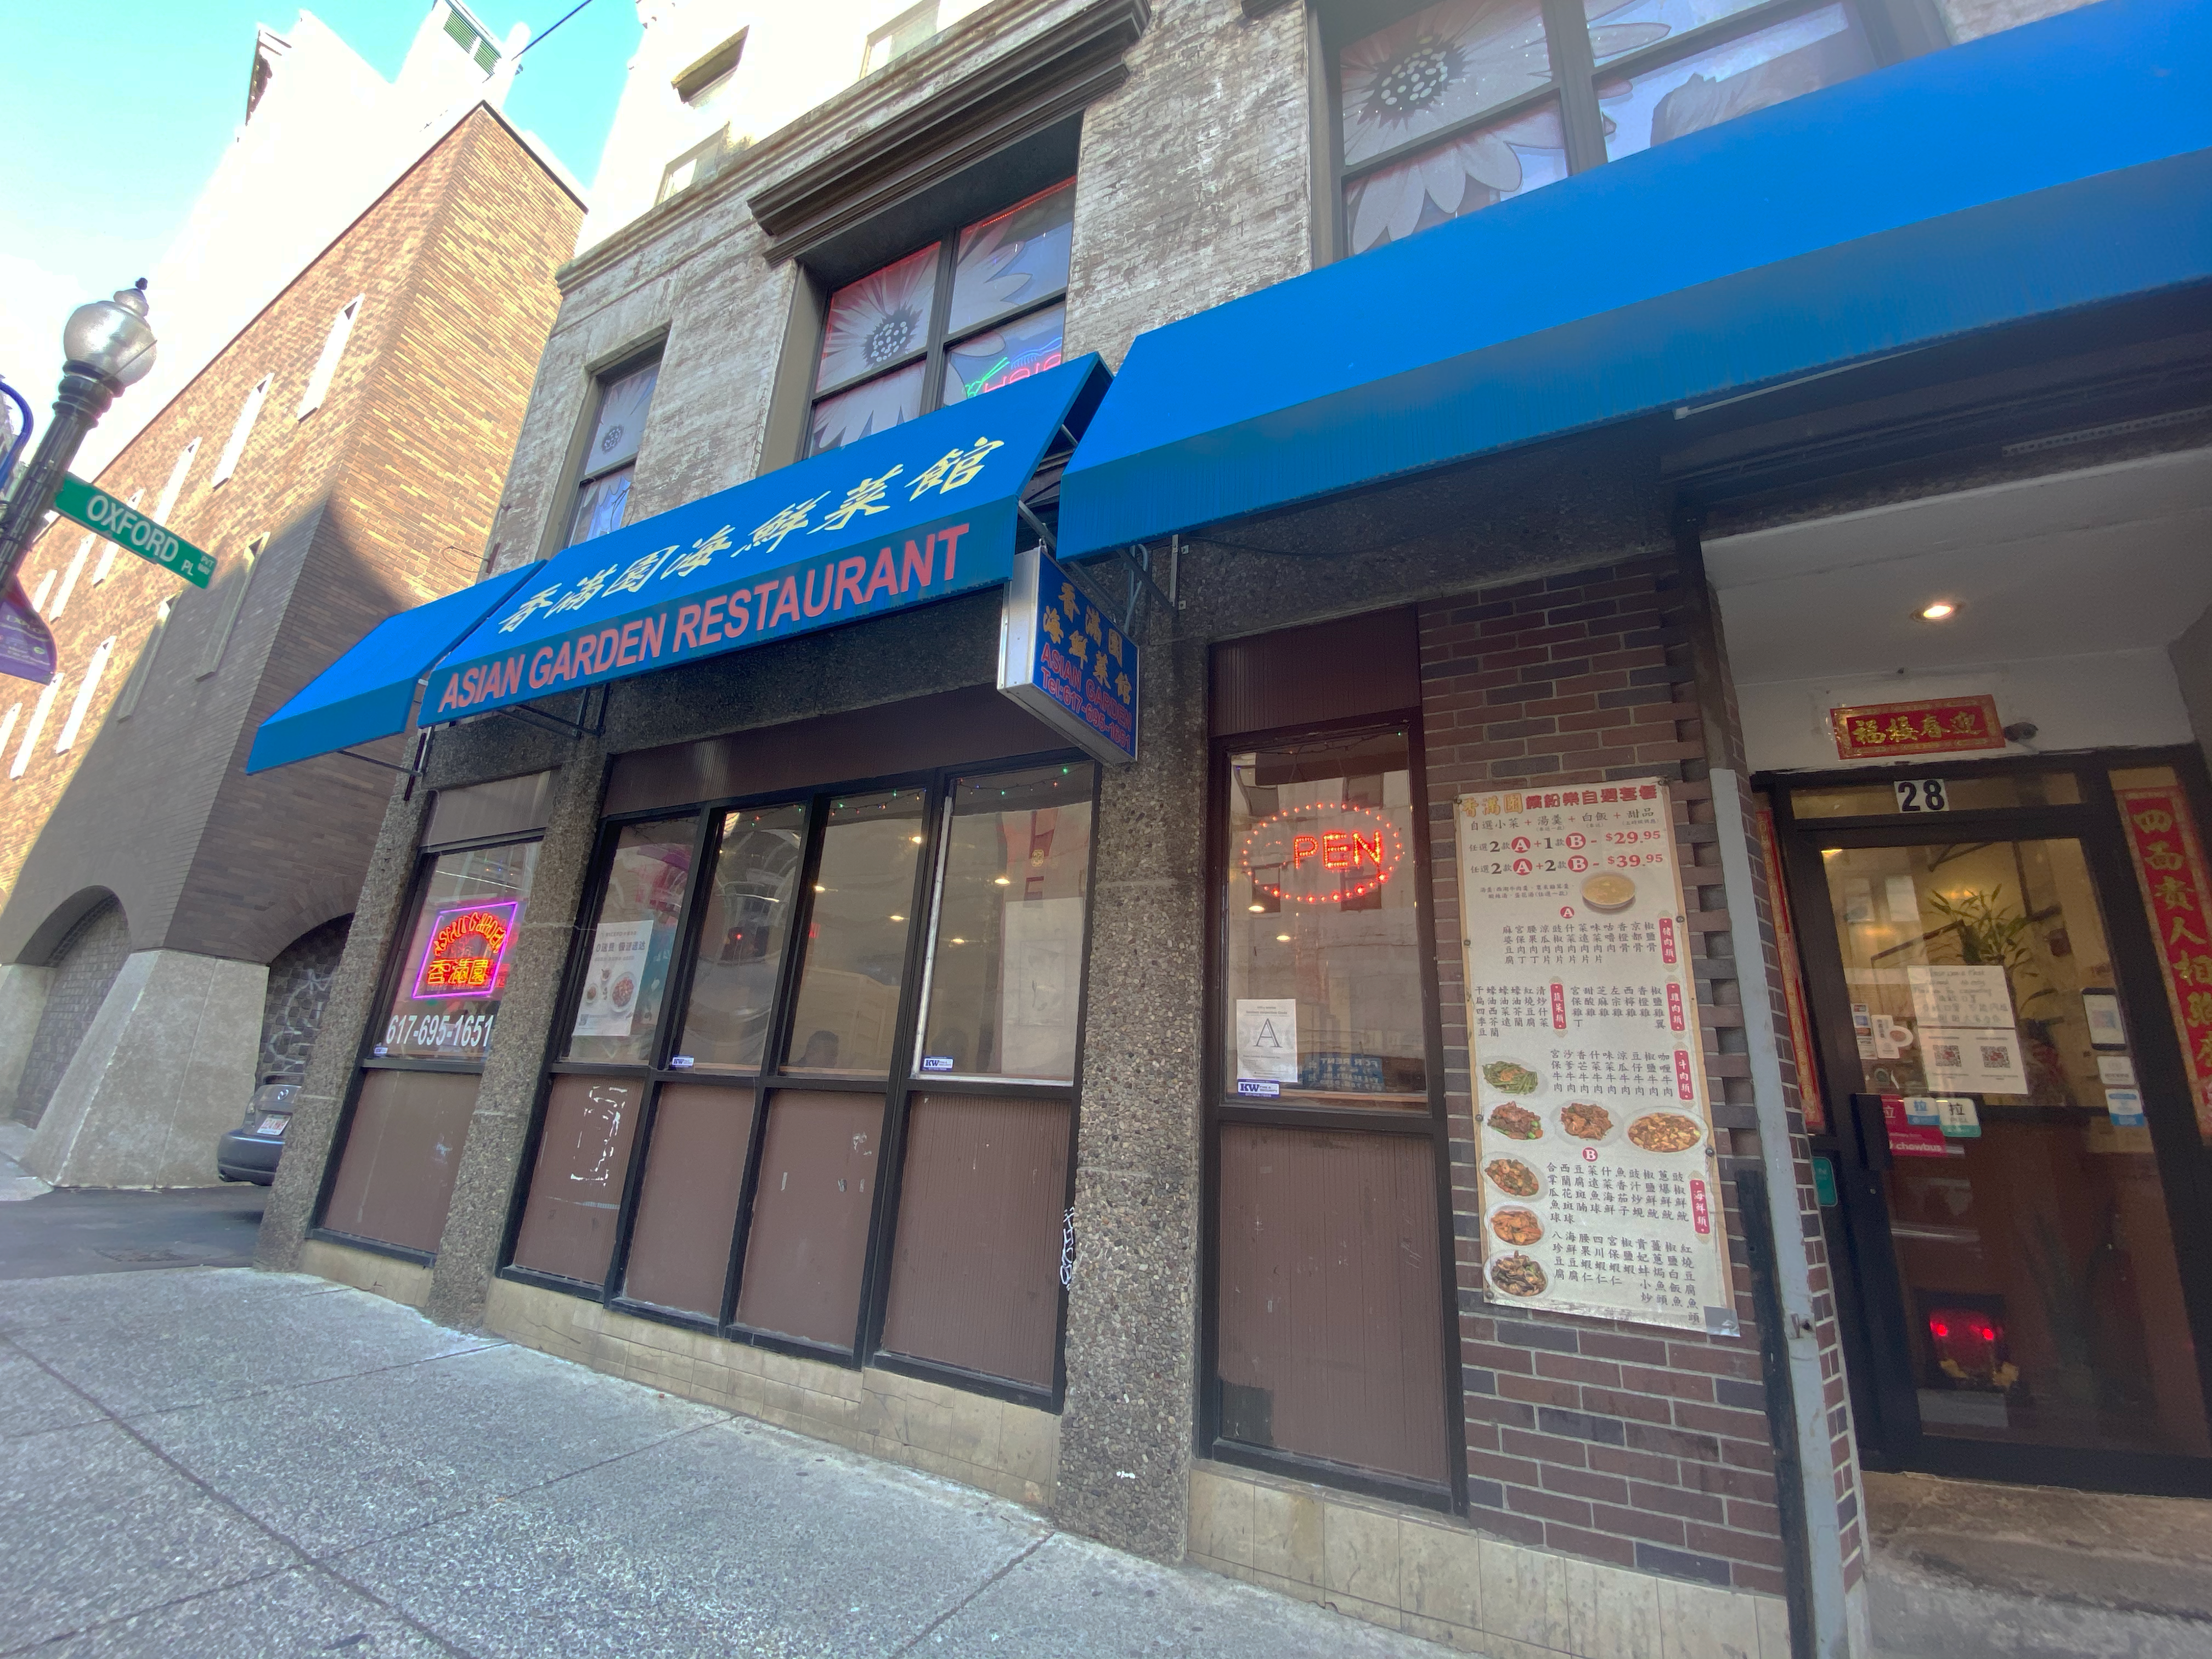 outside of the restaurant, showing neon open sign